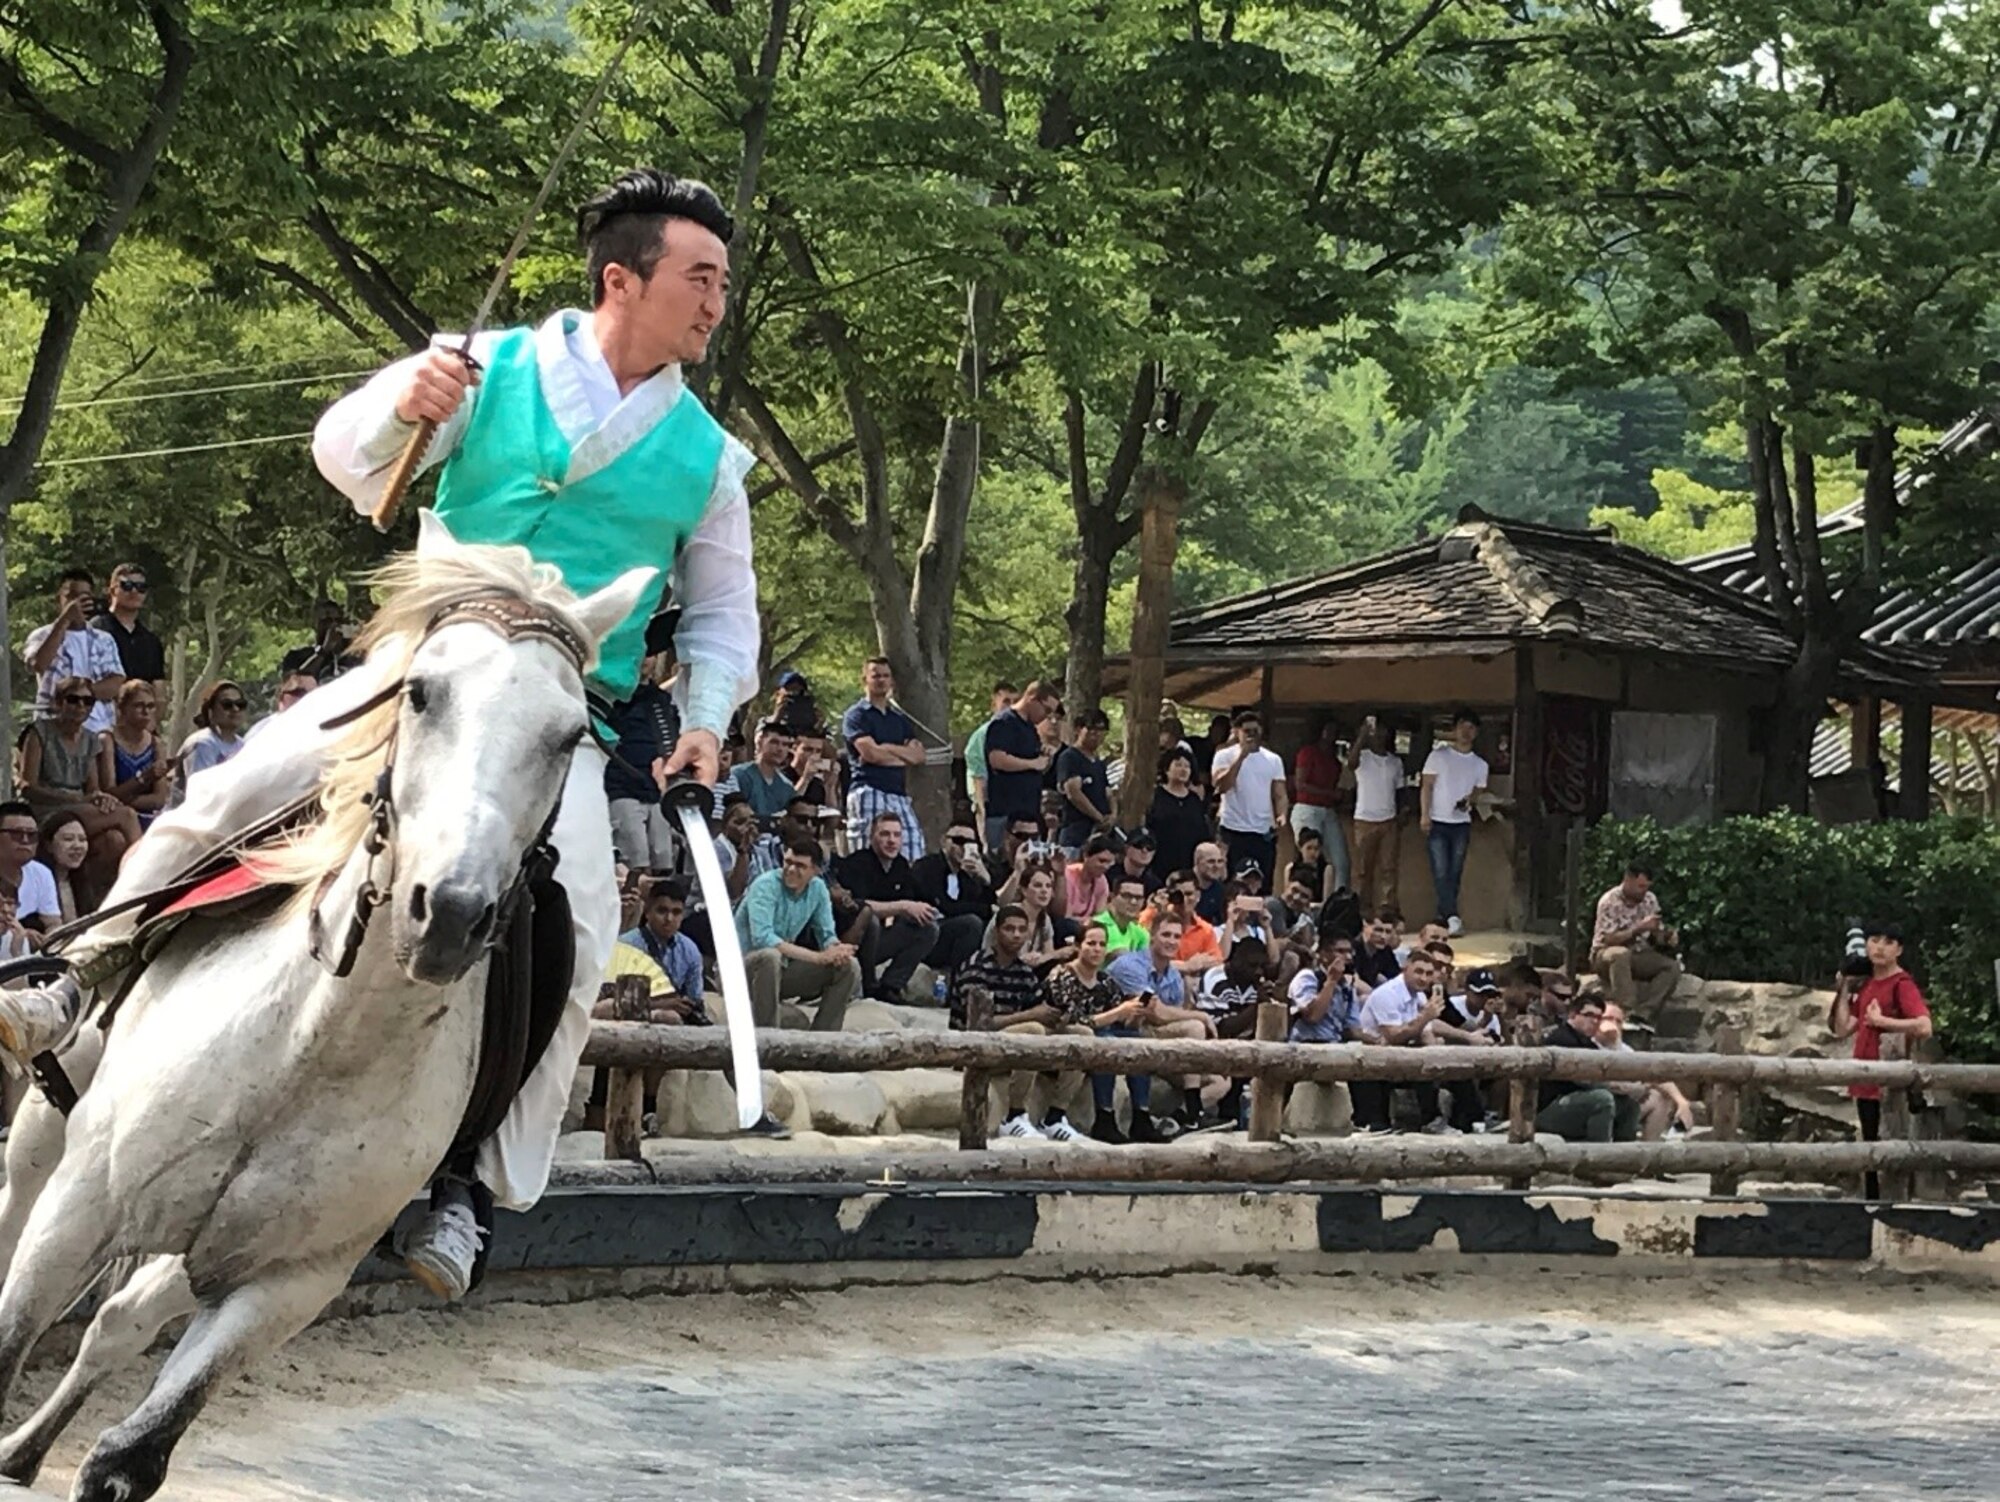 A horseback swordsman demonstrates various skills during an equestrian feats performance in Yongin, Republic of Korea, July 20, 2017. The Korean Folk Village hosts performances of traditional art forms from the Joseon Dynasty period to connect the past to the present. Nearly 100 United States Forces Korea members were invited by the Ministry of Patriots and Veterans Affairs to tour this location and other historic sites across the ROK as part of an initiative to give U.S. personnel a better understanding of Korean culture and patriotism. (U.S. Air Force photo by 1st Lt. Lauren Linscott/Released) 